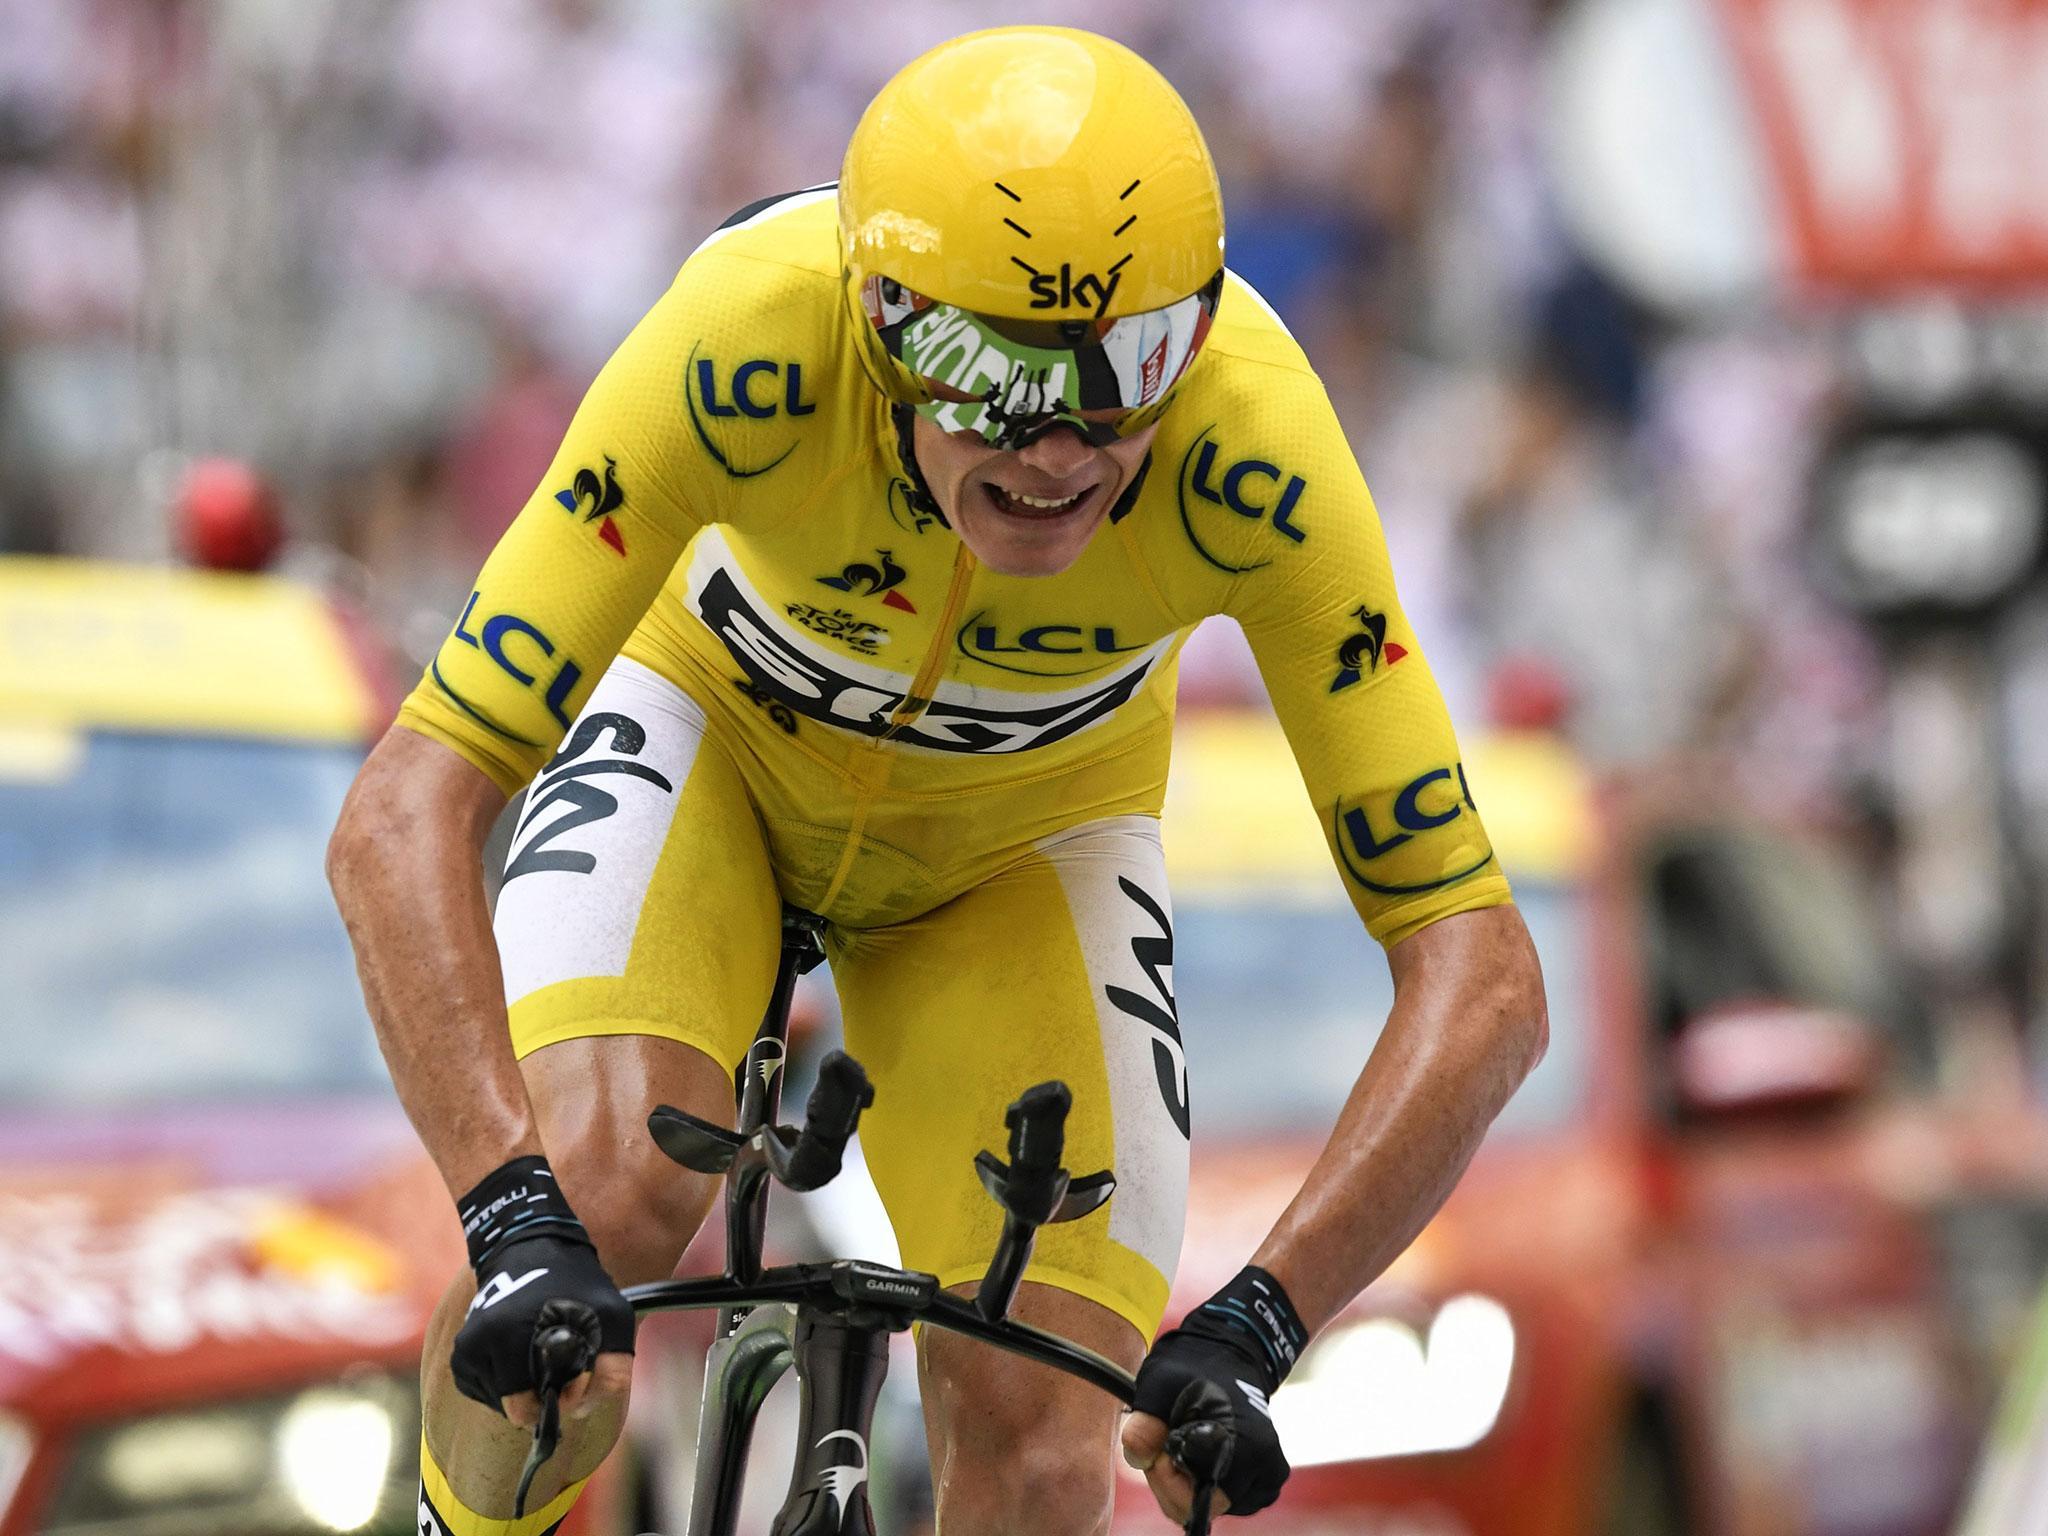 Chris Froome is set to win a fourth Tour de France title